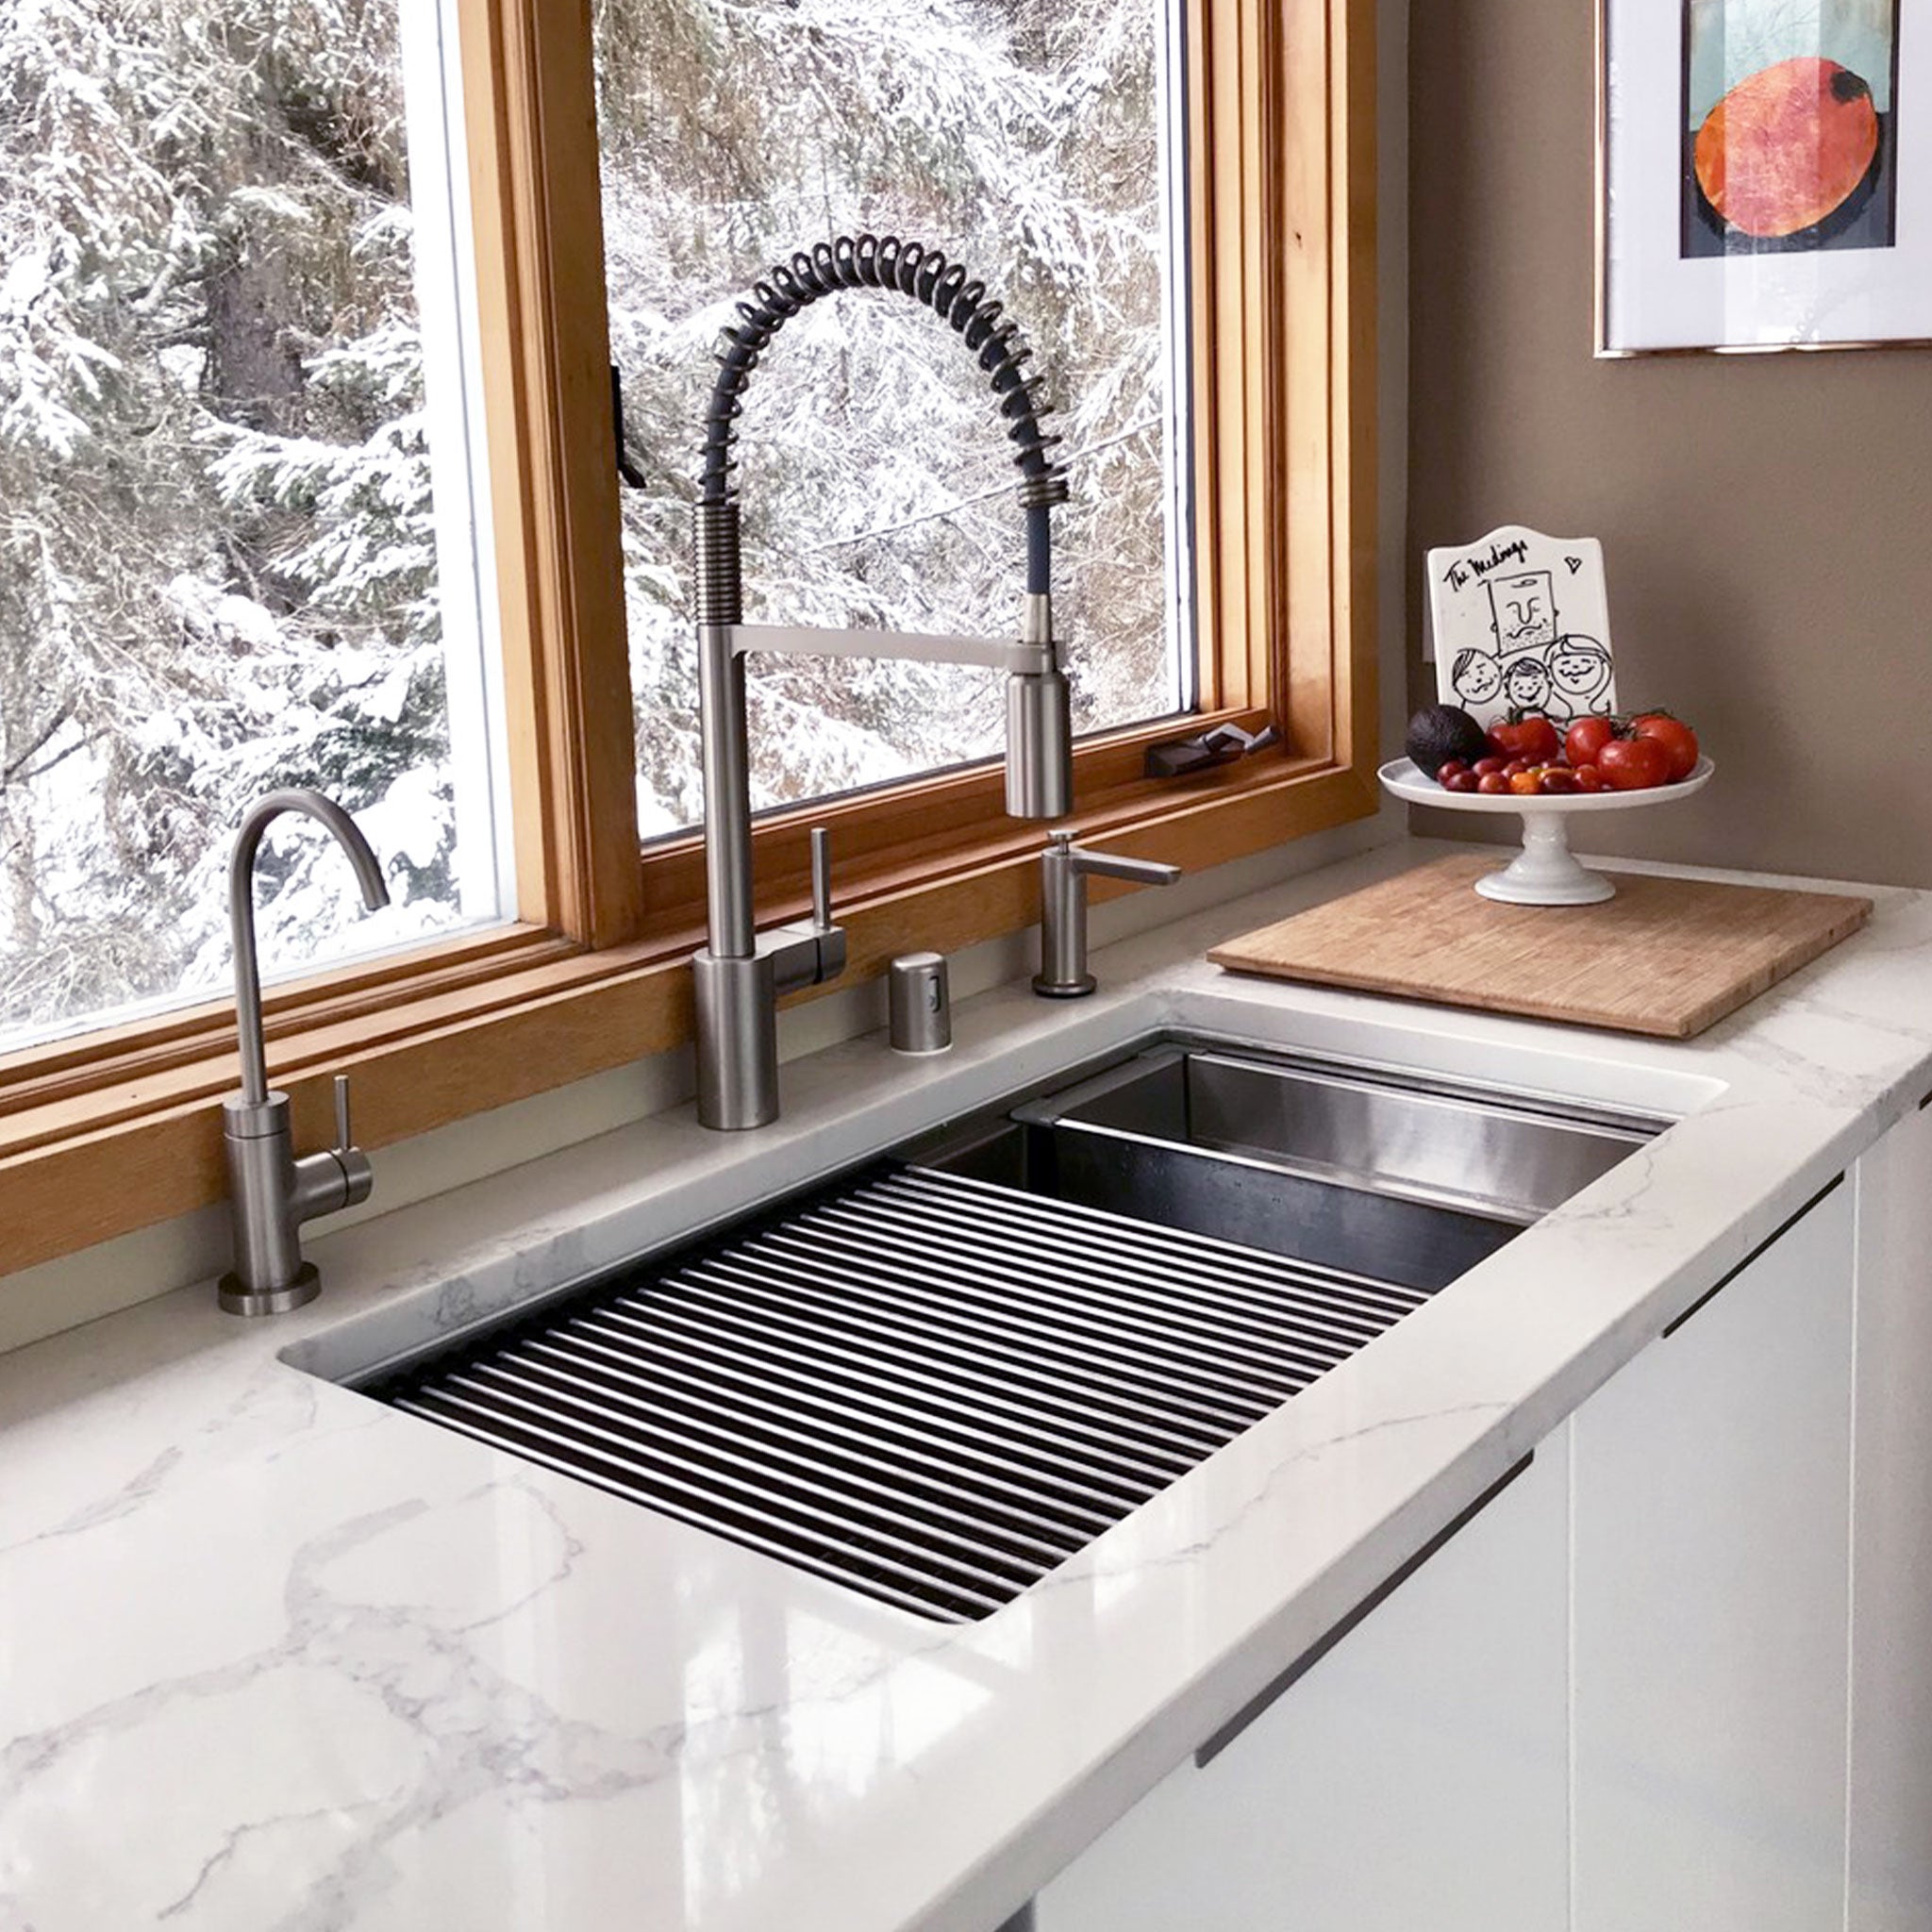 Create Good Sinks' Stainless Steel Colander and Rollmat Bars in a Workstation Kitchen Basin